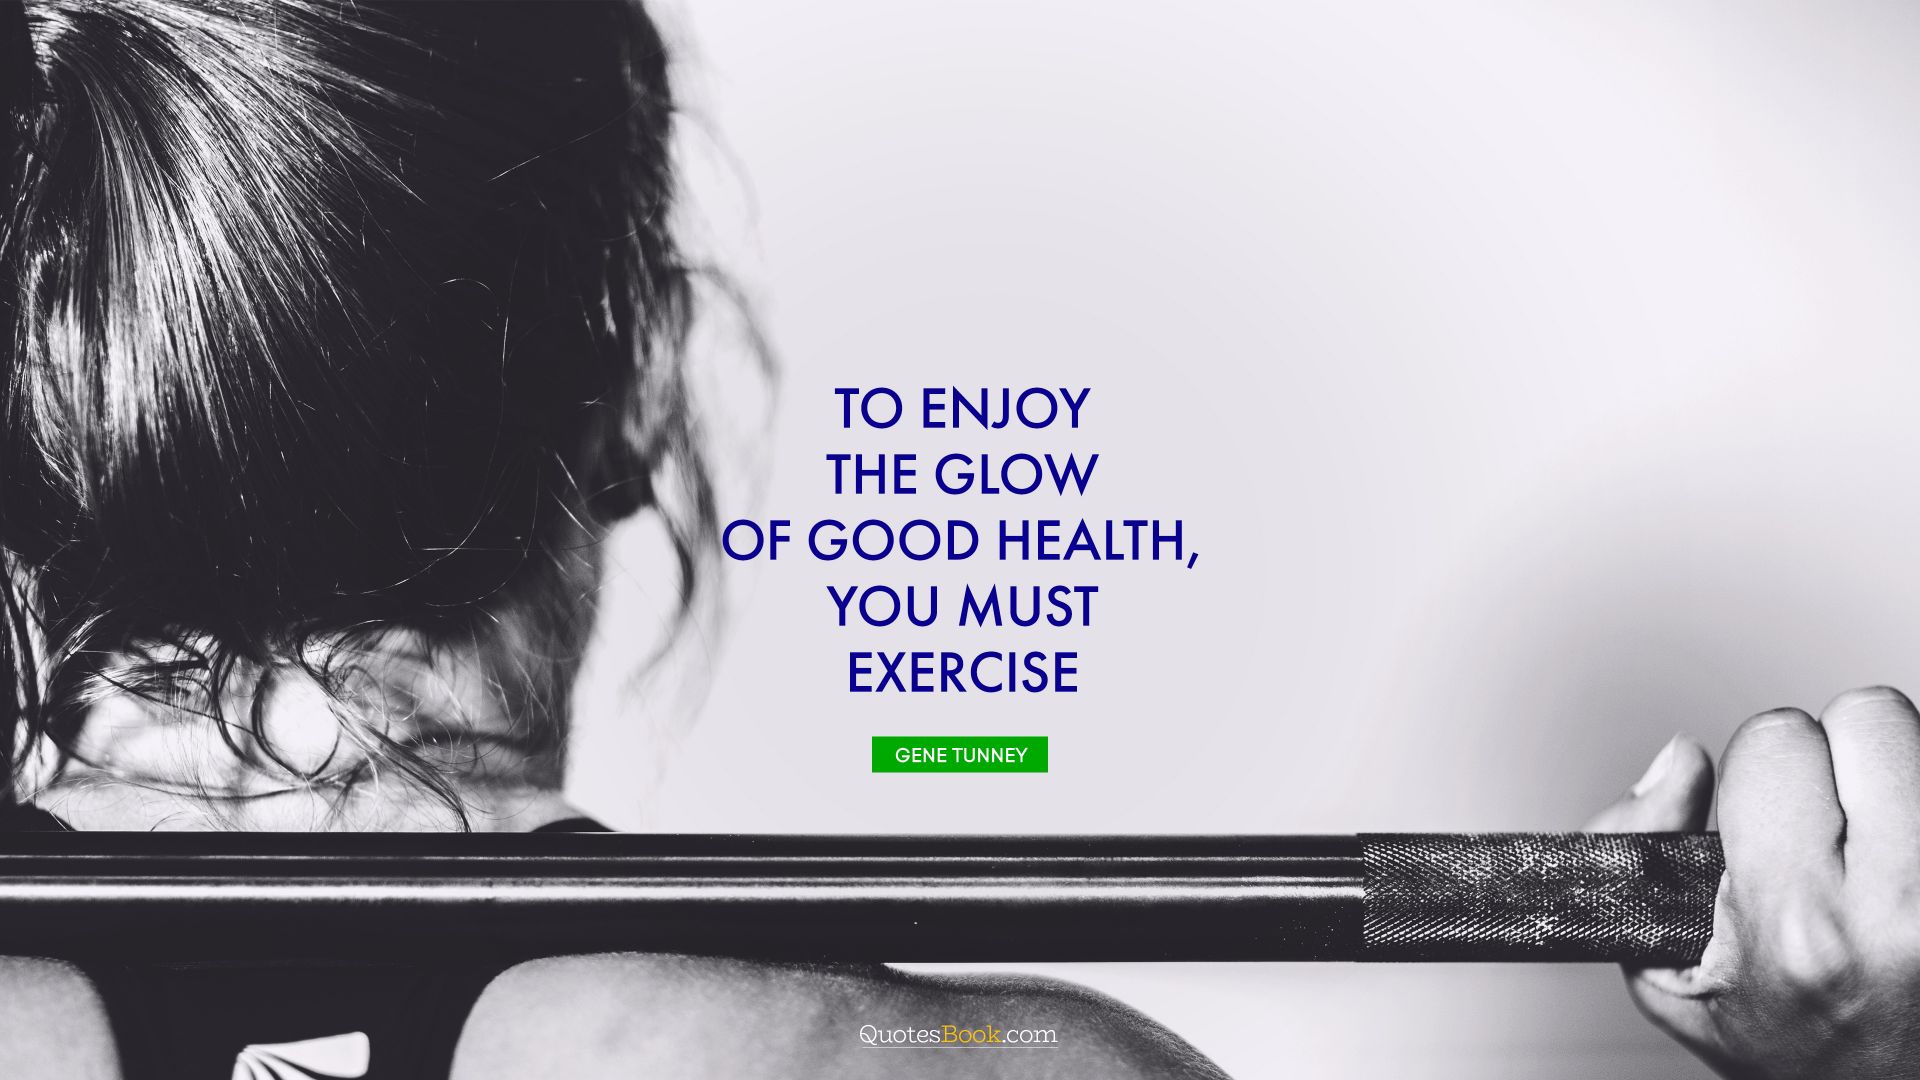 To enjoy the glow of good health, you must exercise. - Quote by Gene Tunney